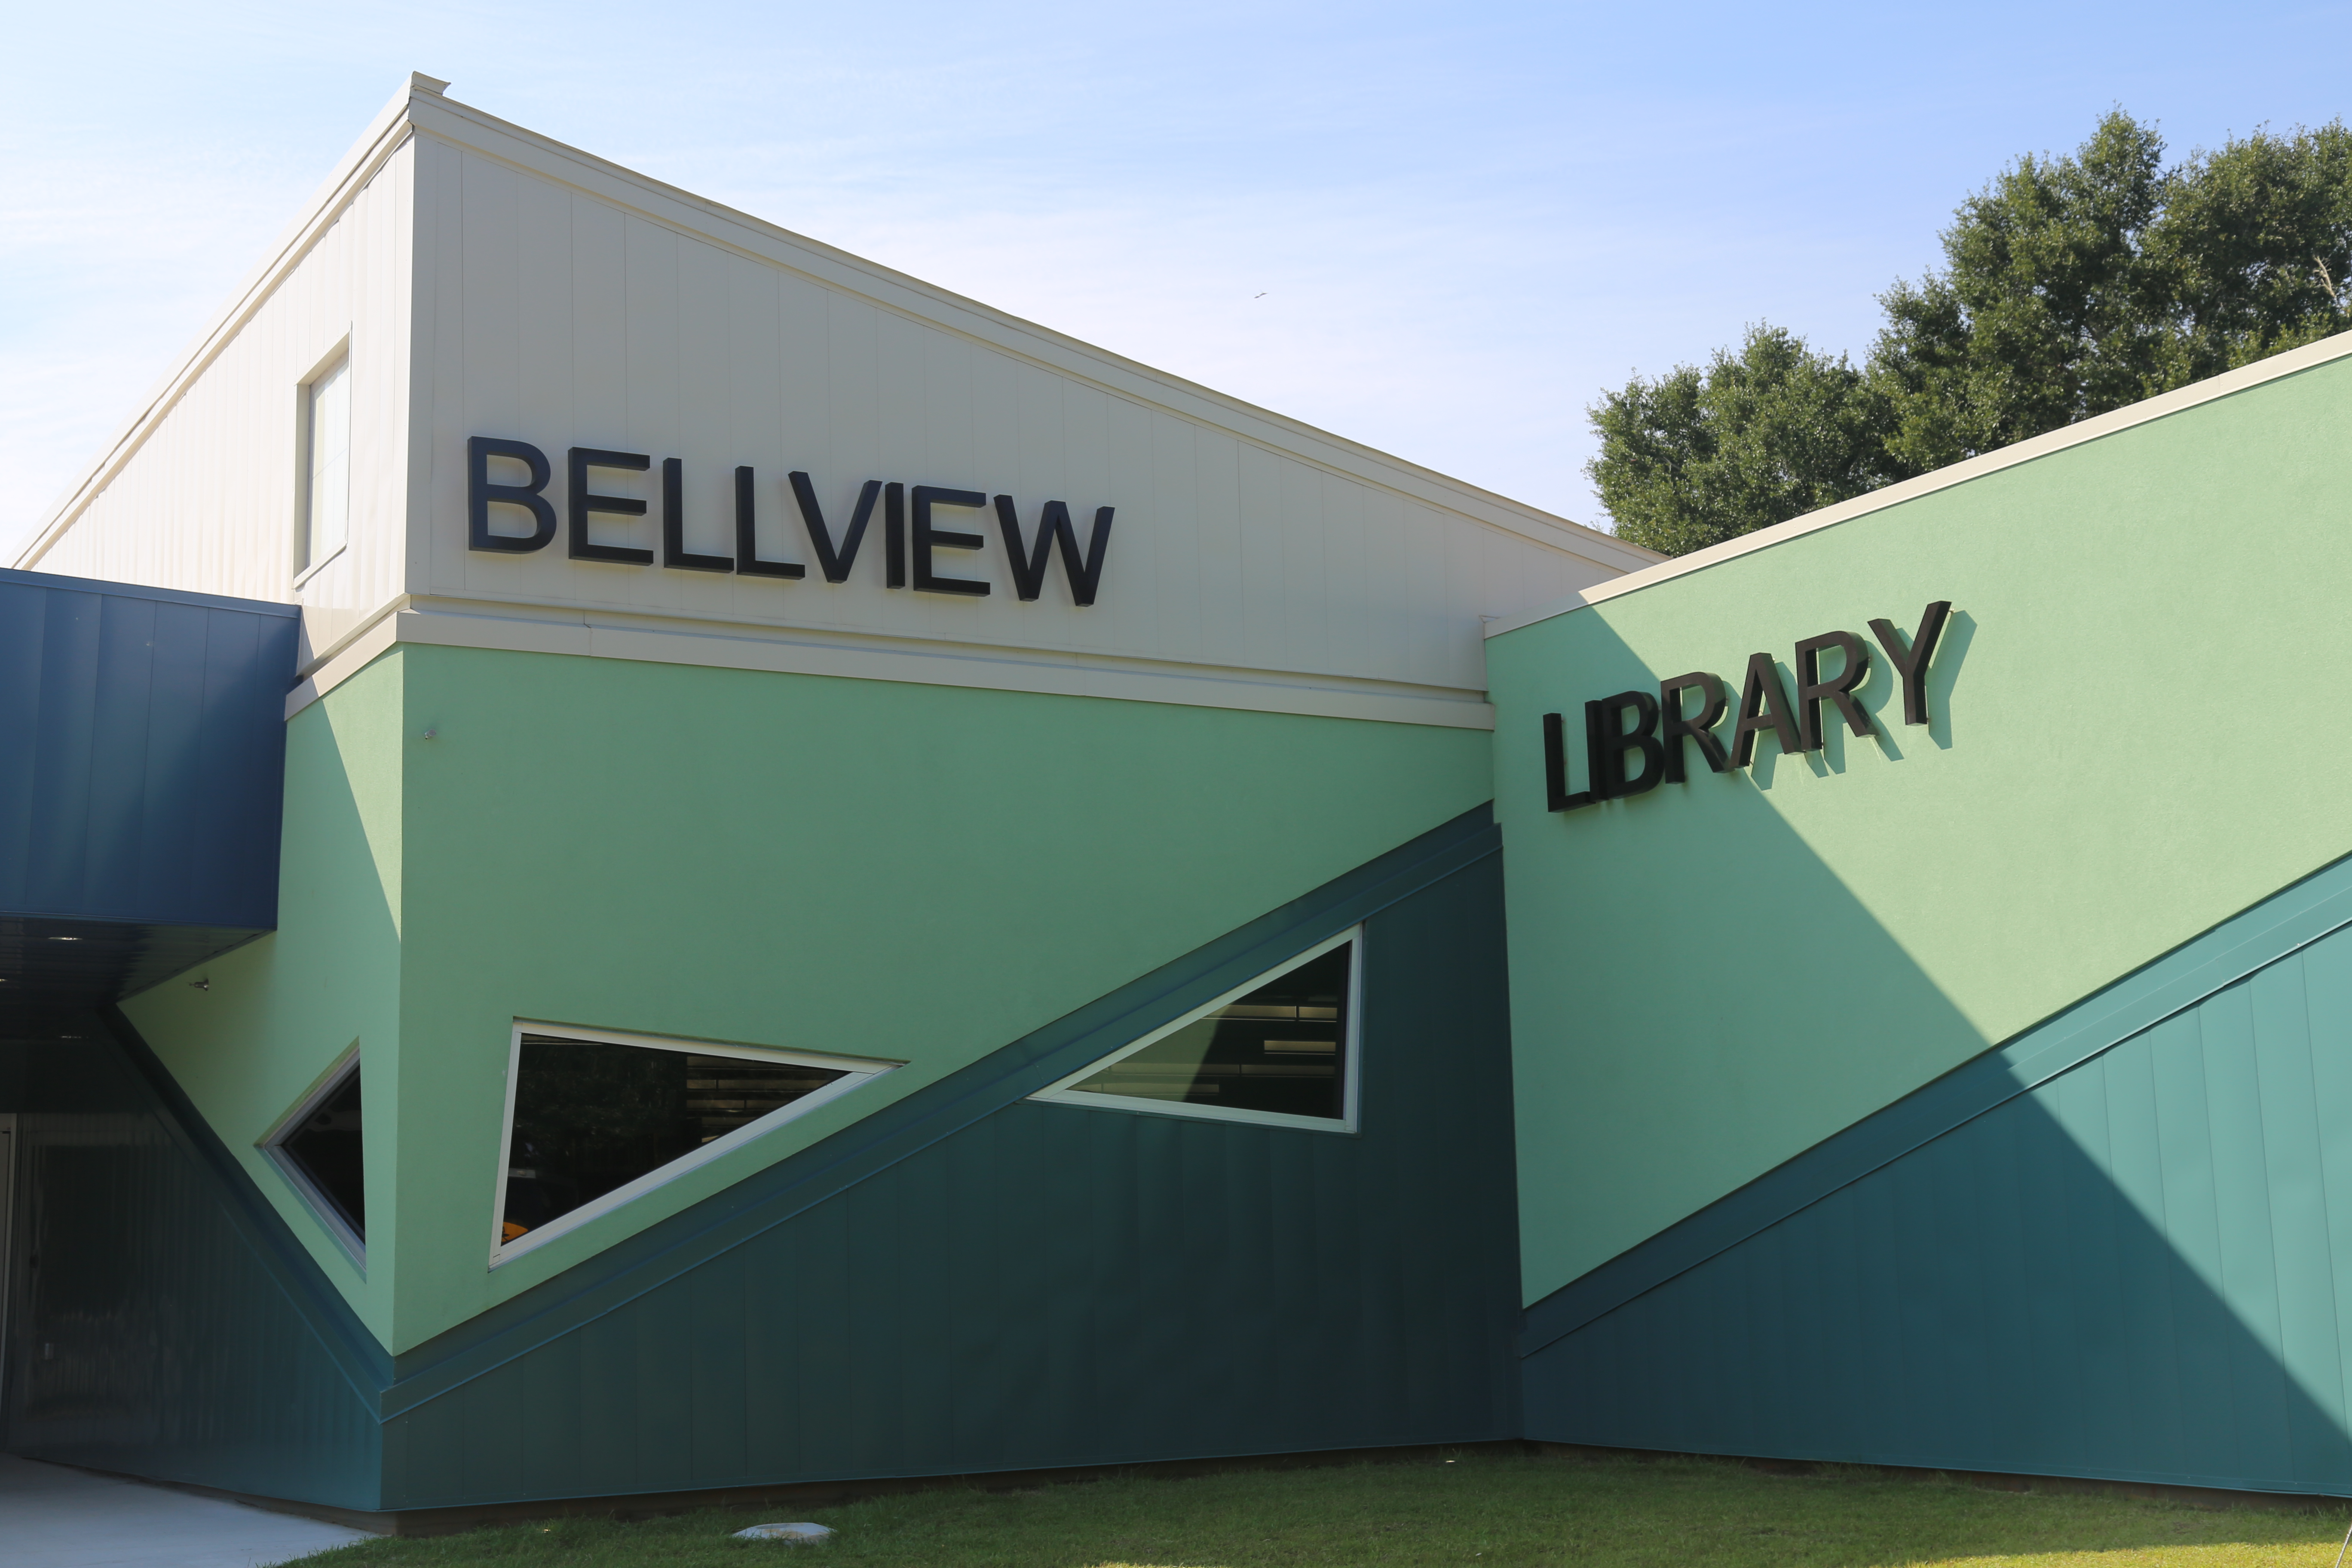 Bellview Library